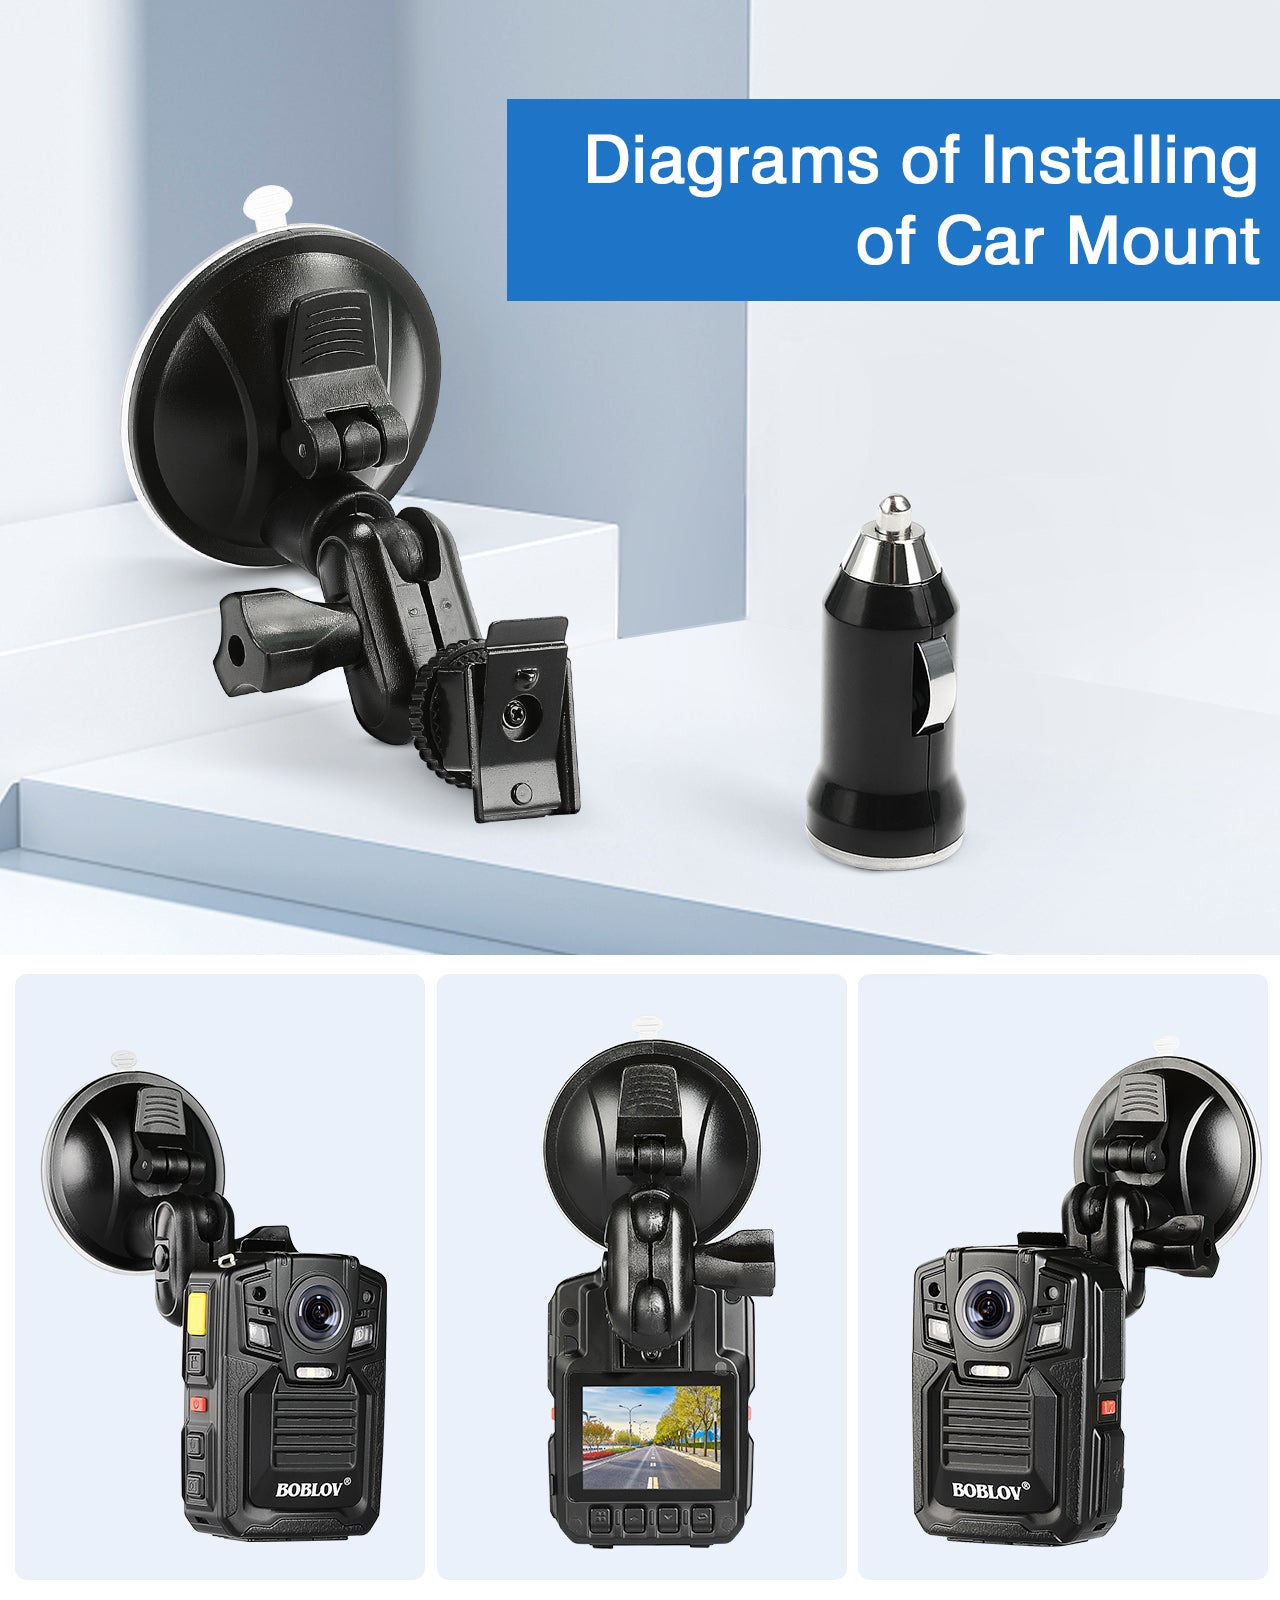 BOBLOV Car Suction Cup for HD66-02/D7 Body Camera, Car Mount and a Car Charger ONLY for HD66-02/D7 Body Camera, Dash Camera Accessories for HD66-02/D7 Body Camera(Camera not Included)